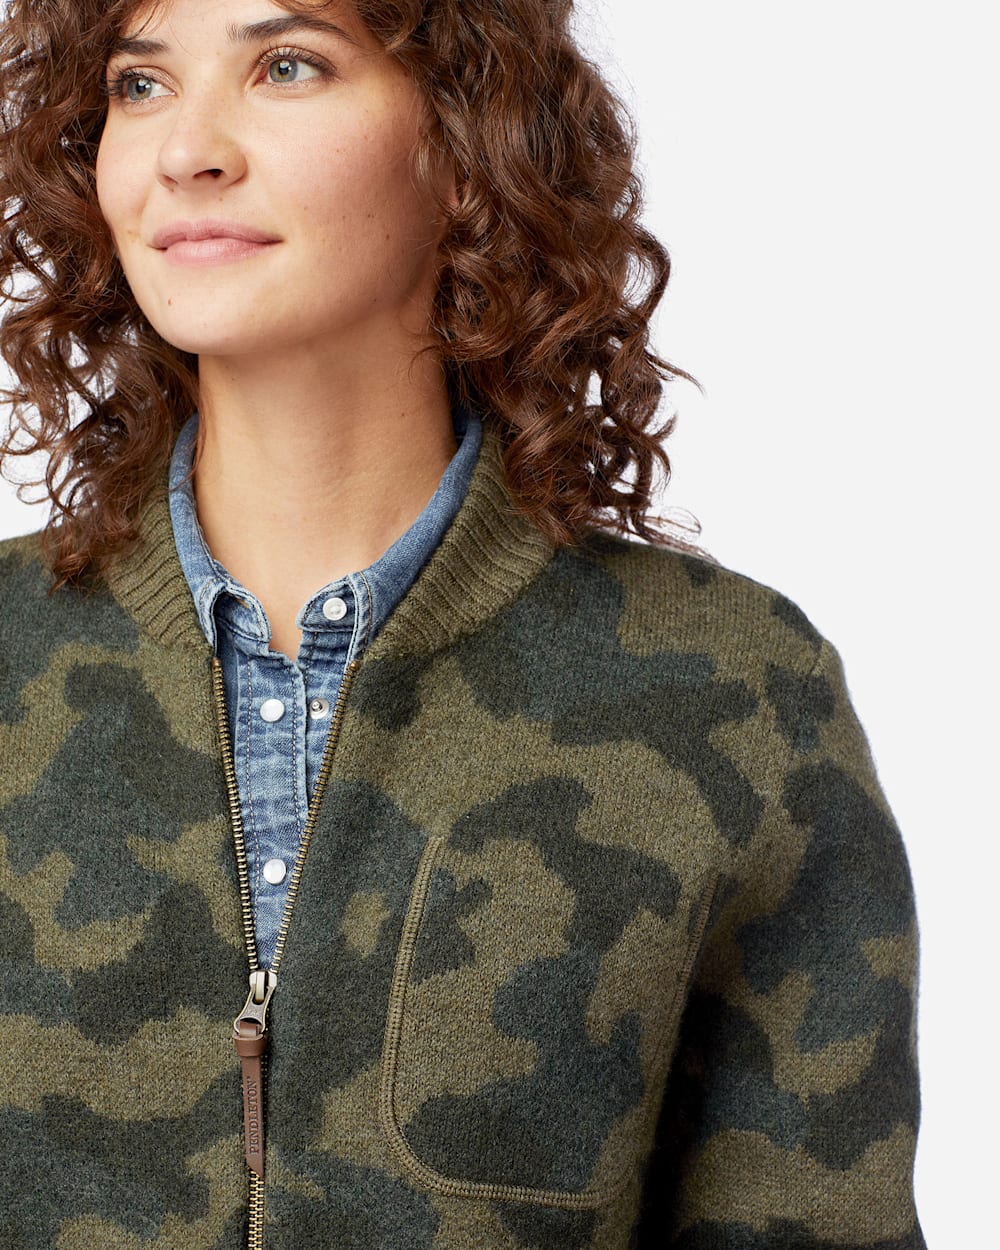 ALTERNATE VIEW OF WOMEN'S BOILED WOOL BOMBER JACKET IN OLIVE CAMO image number 4